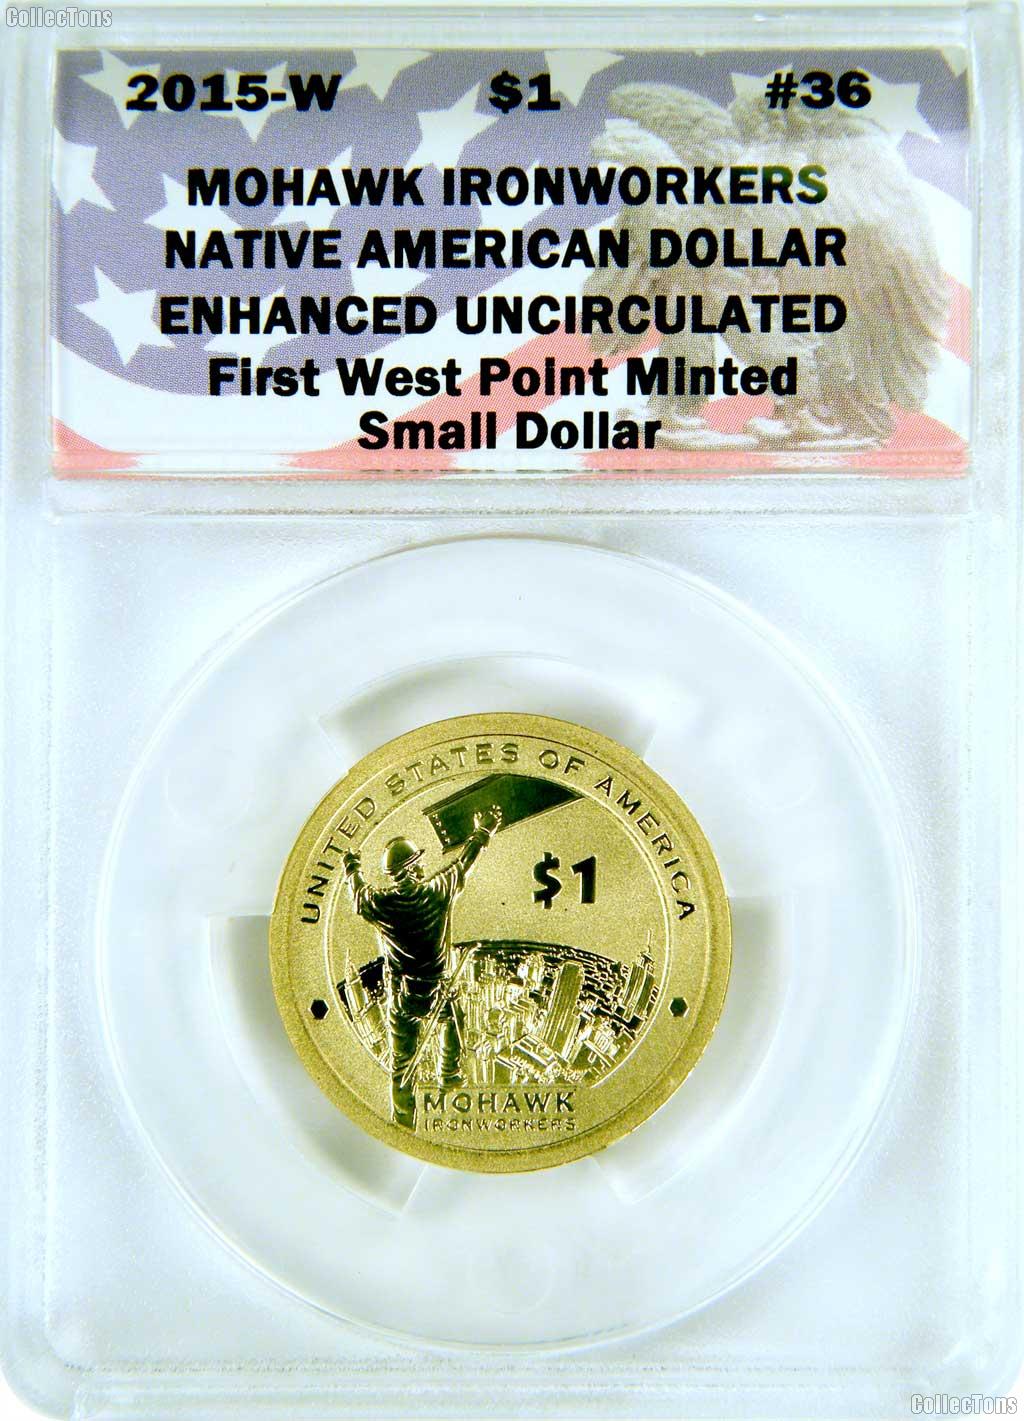 CollecTons Keepers #36: 2015-W Mohawk Ironworkers Native American Dollar Certified in Exclusive ANACS Enhanced Uncirculated Holder